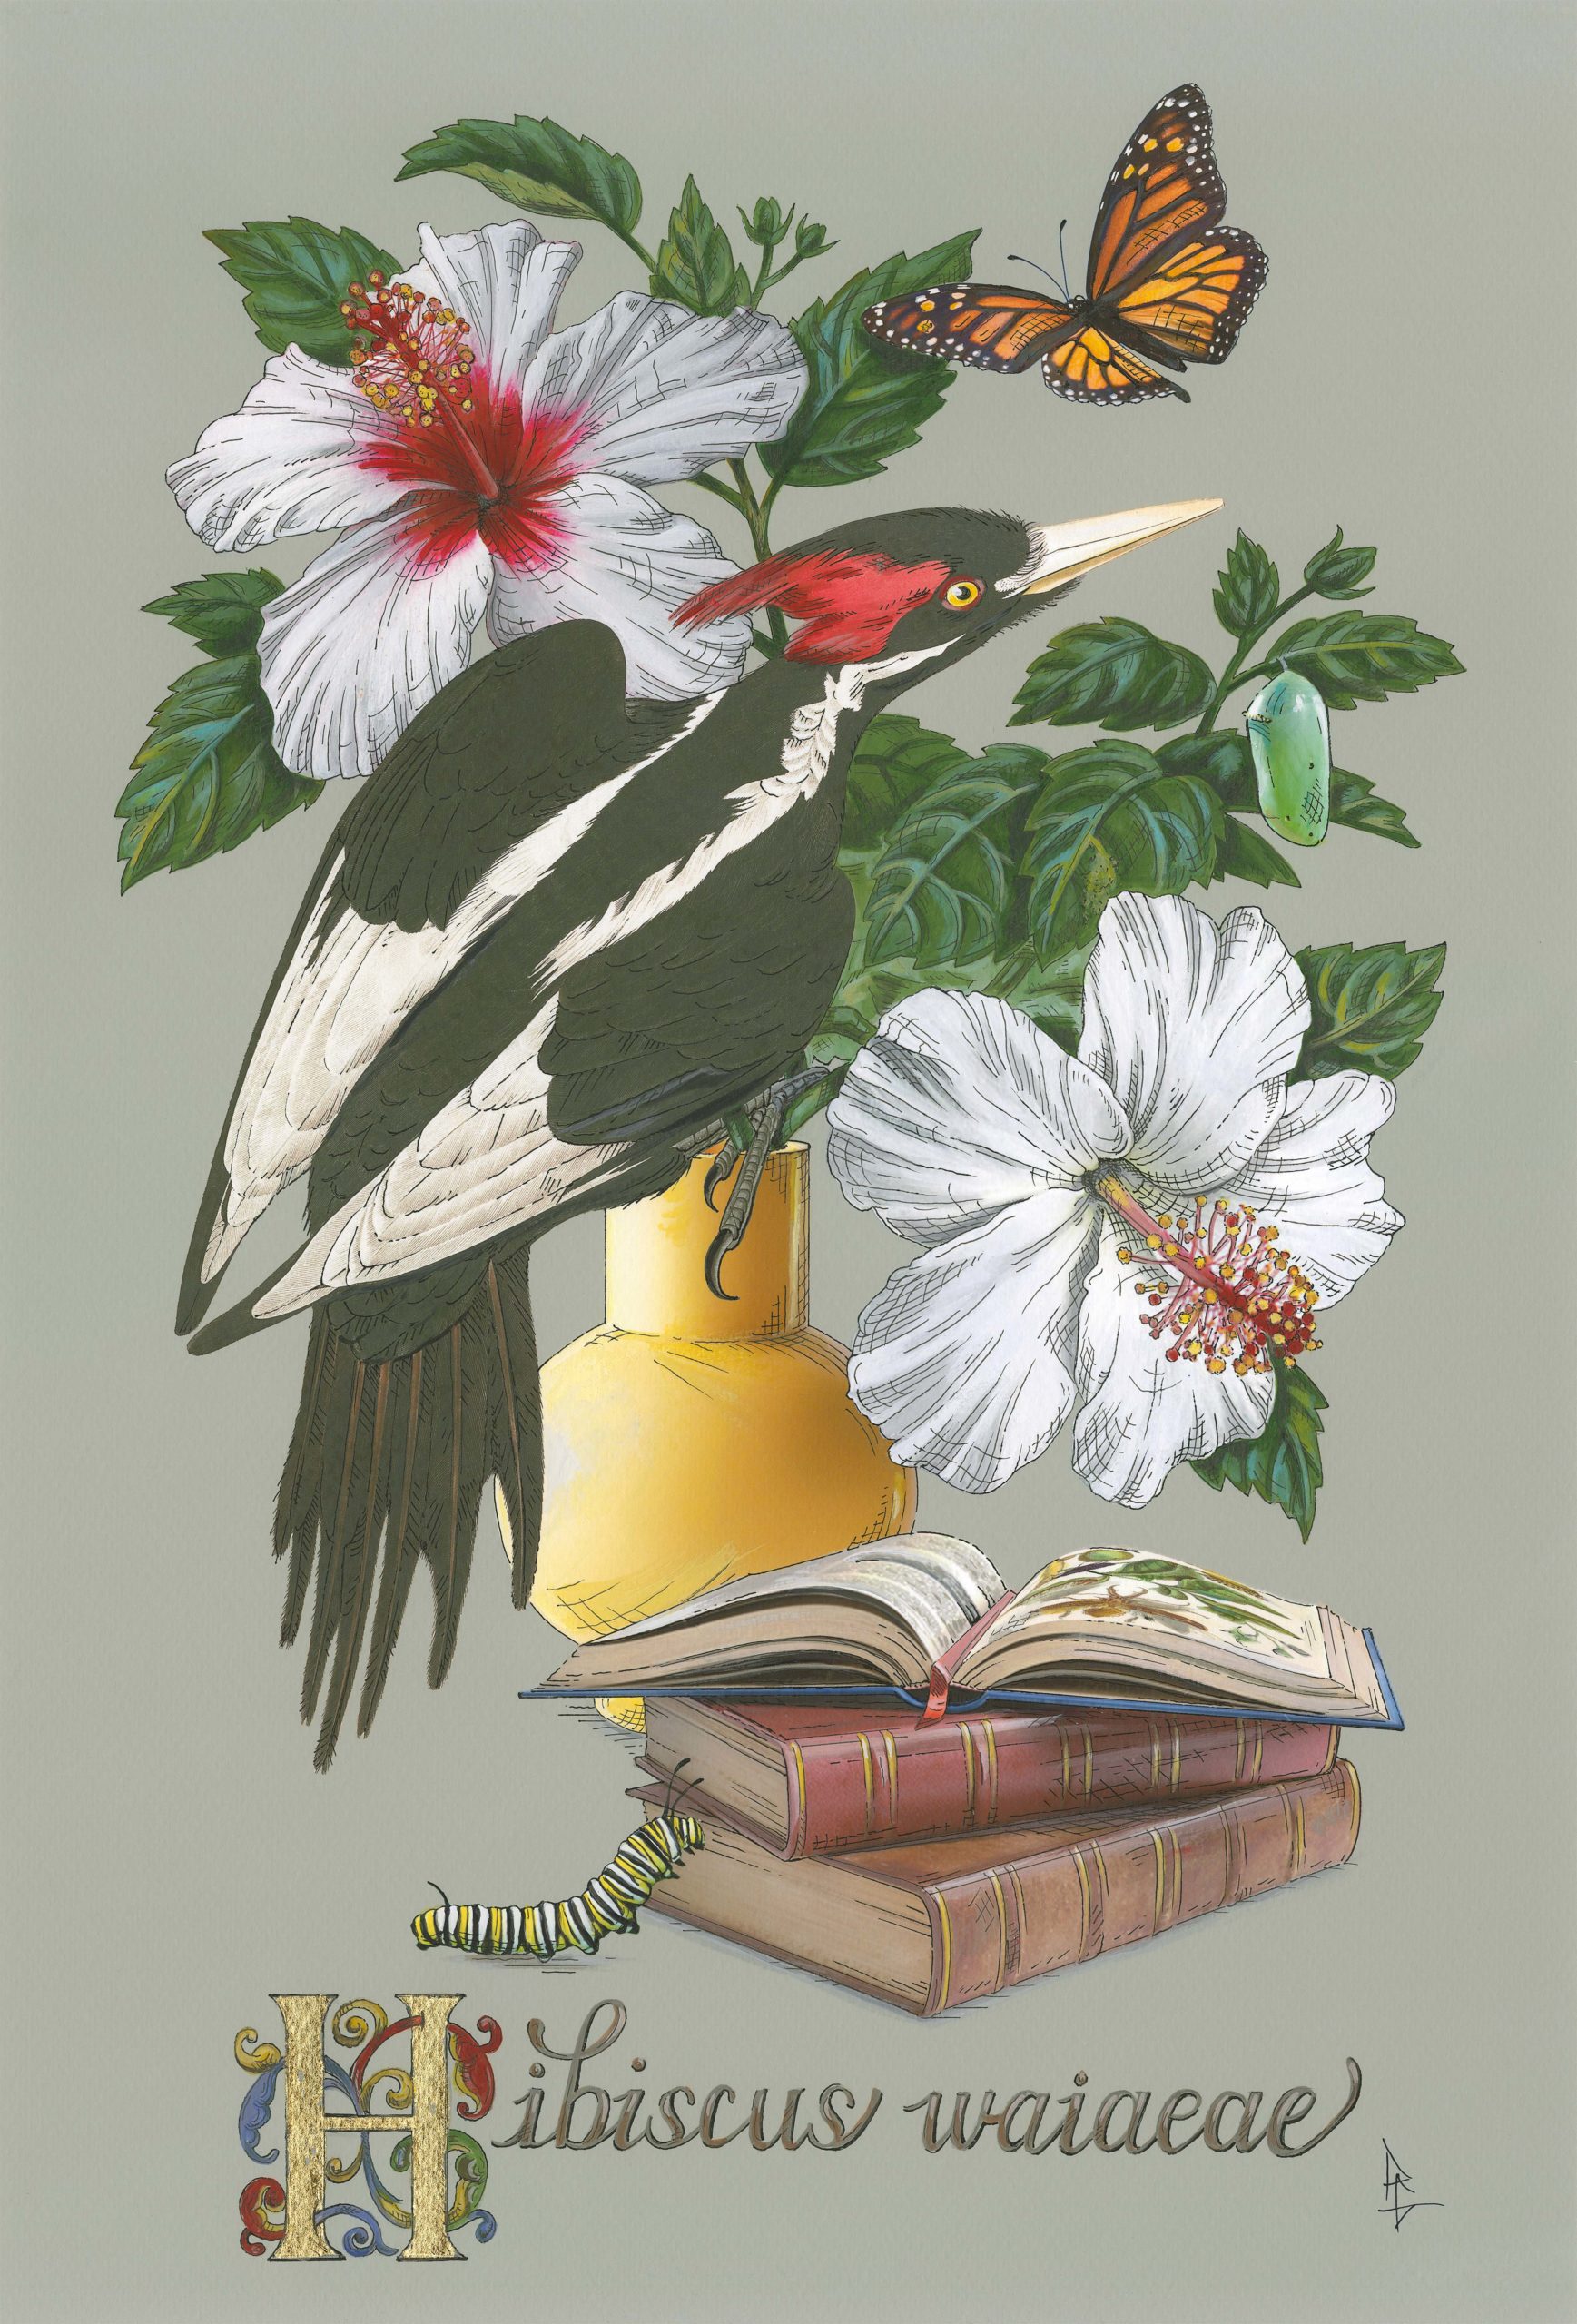 
		                					Penelope Gottlieb		                																	
																											<i>Hibiscus waiaeae,</i>  
																																								2021, 
																																								acrylic and ink over a digital reproduction of an Audubon print, 
																																								18 x 12 inches 
																								
		                				